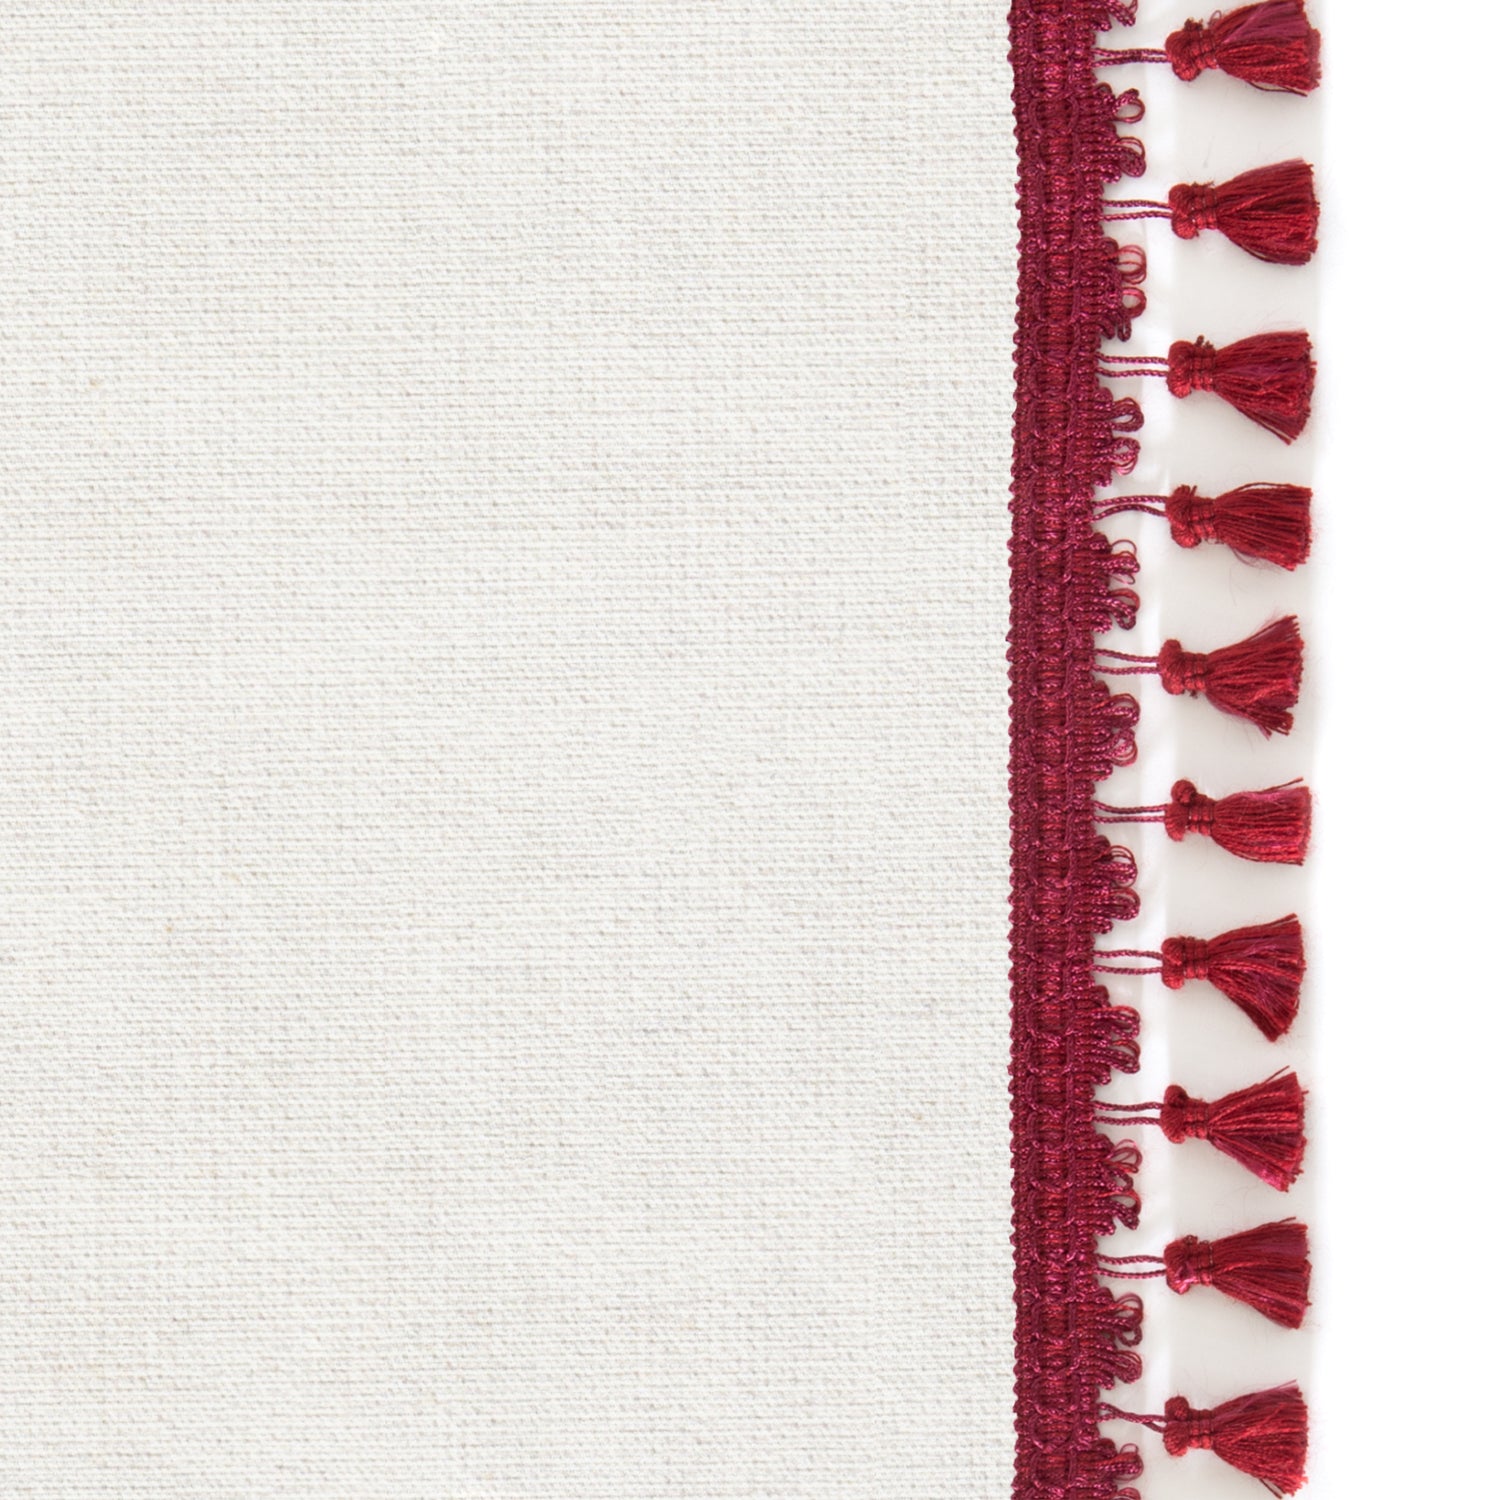 Upclose picture of Flour custom Natural Whiteshower curtain with flour raspberry tassel trim